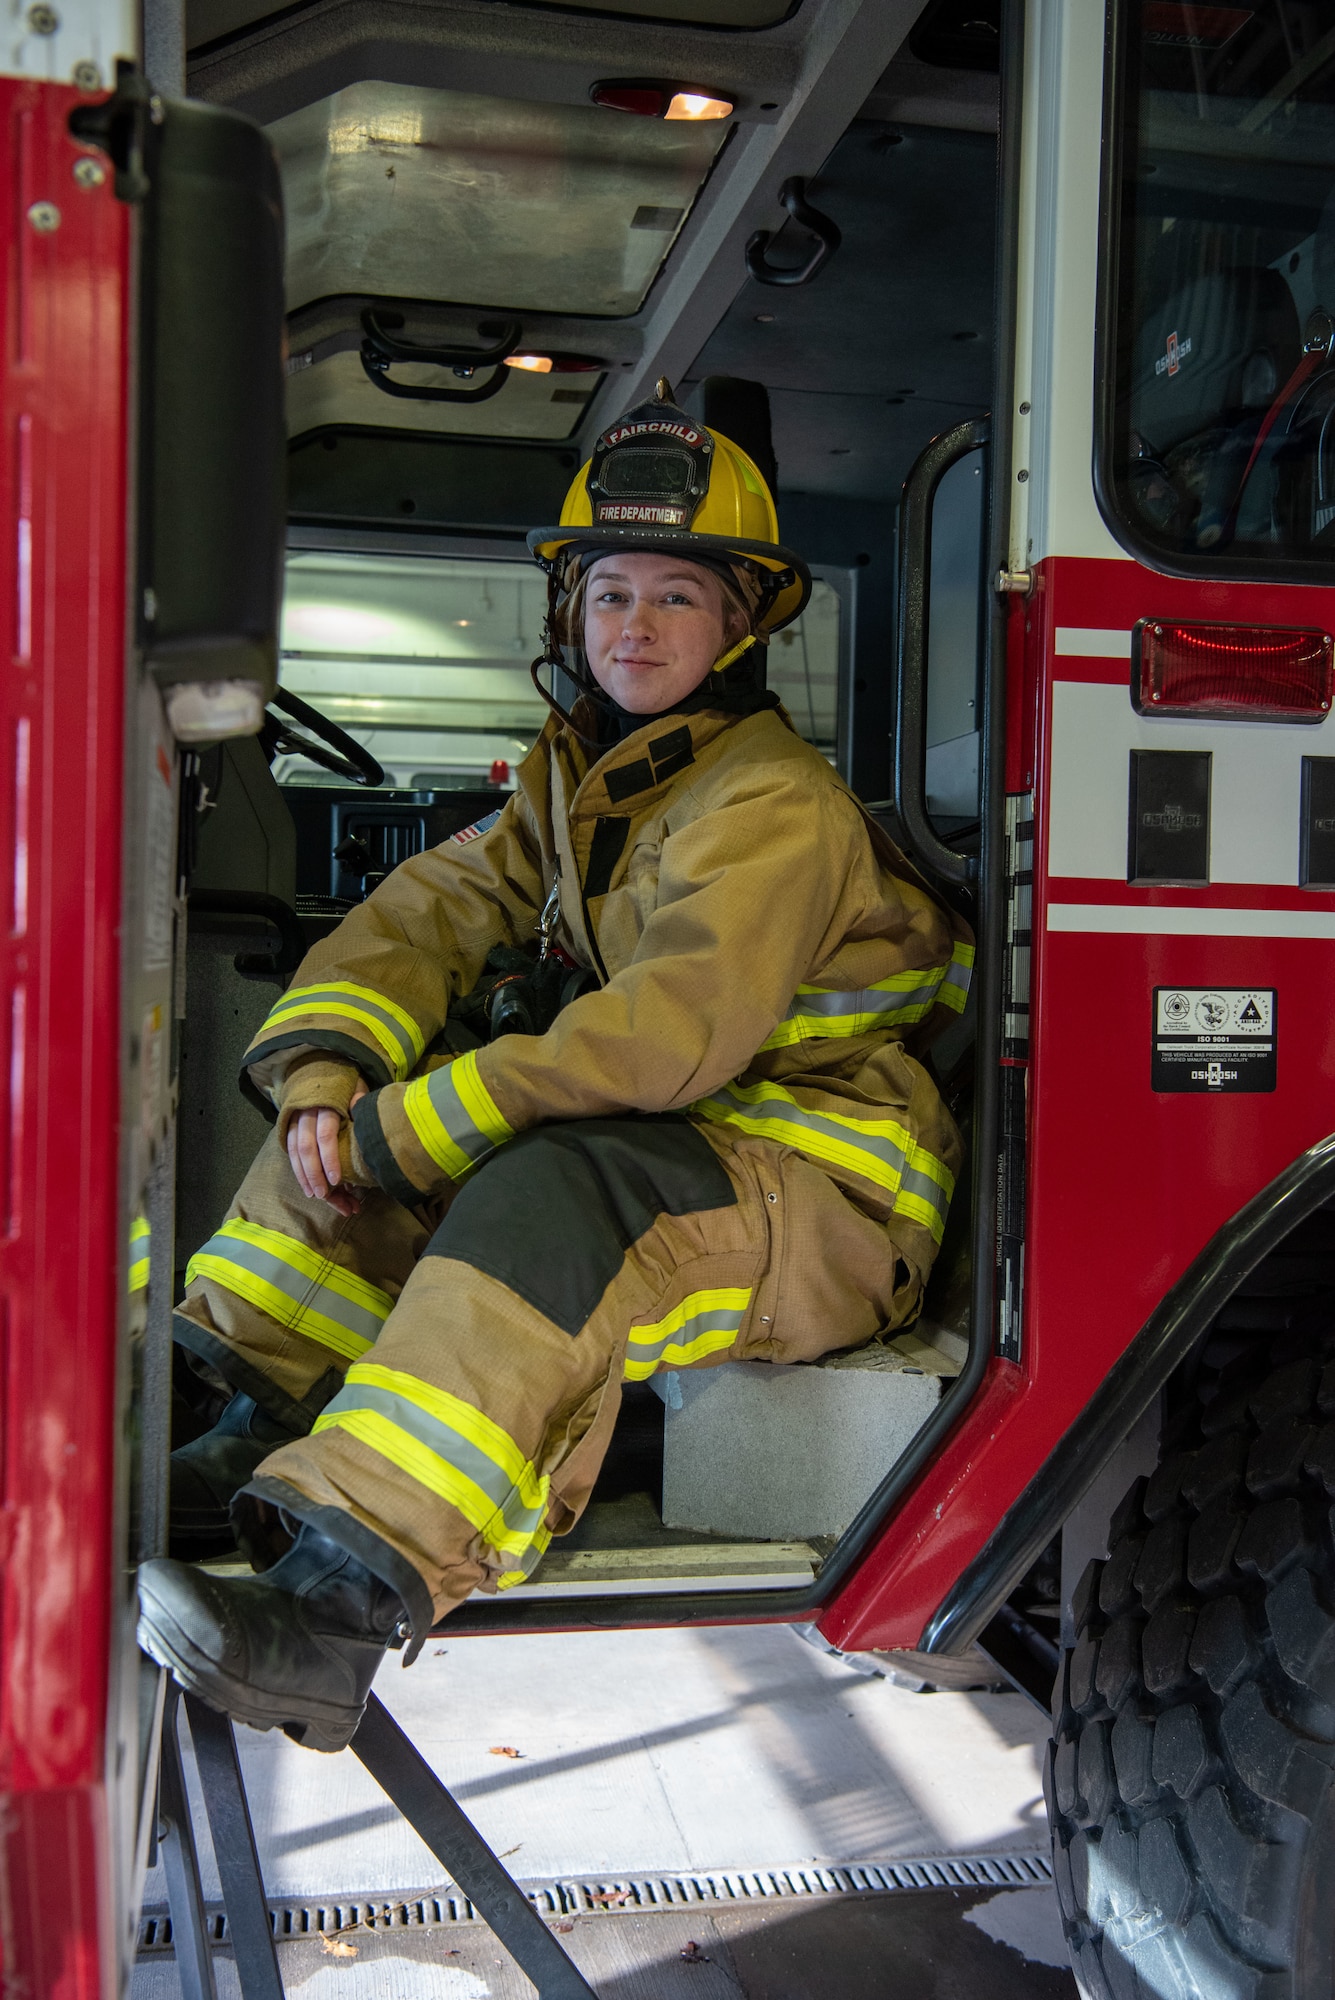 U.S. Air Force Senior Airman Layla Rice, firefighter assigned to the 92nd Civil Engineer Squadron Fire Department, poses in a fire truck at Fairchild Air Force Base, Washington, March 8, 2023. Rice is the only female active-duty firefighter stationed at Fairchild Air Force Base. (U.S. Air Force photo by Airman 1st Class Lillian Patterson)